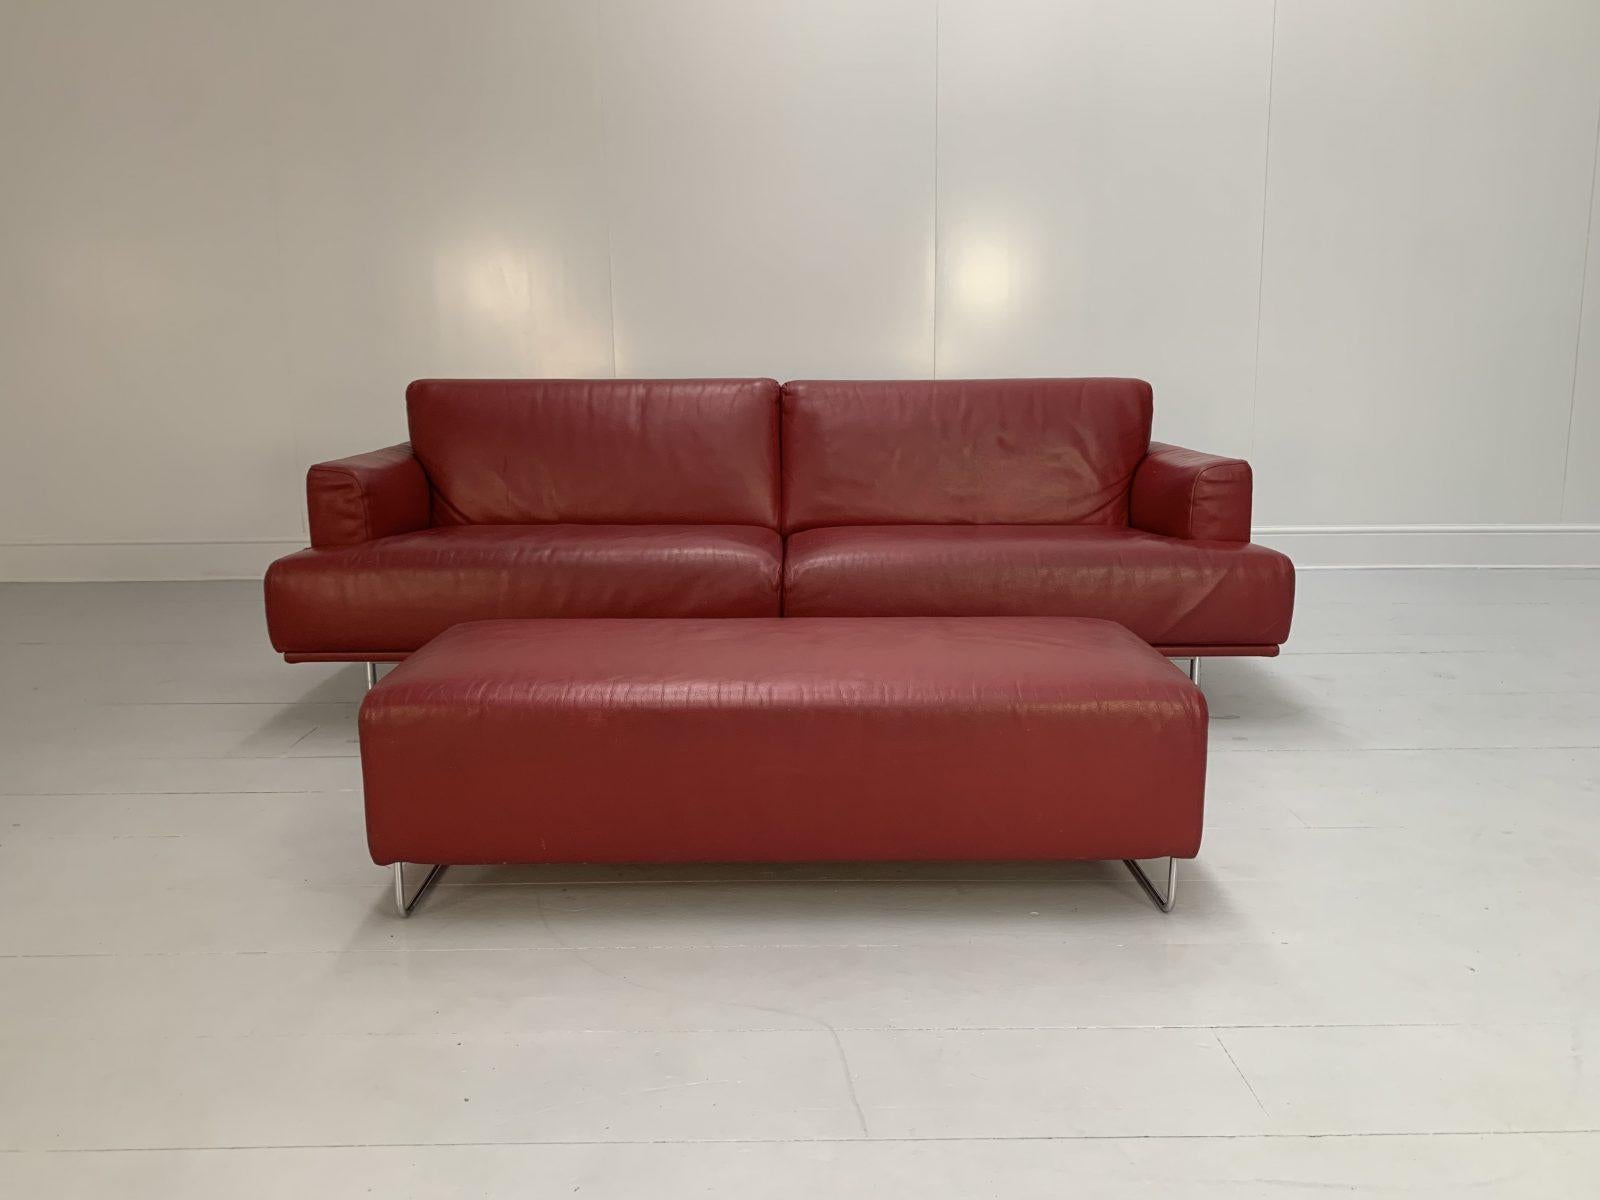 Hello Friends, and welcome to another unmissable offering from Lord Browns Furniture, the UK’s premier resource for fine Sofas and Chairs.

On offer on this occasion is a superb, beautifully-presented “253 Nest” 2.5-Seat Sofa & Footstool in a